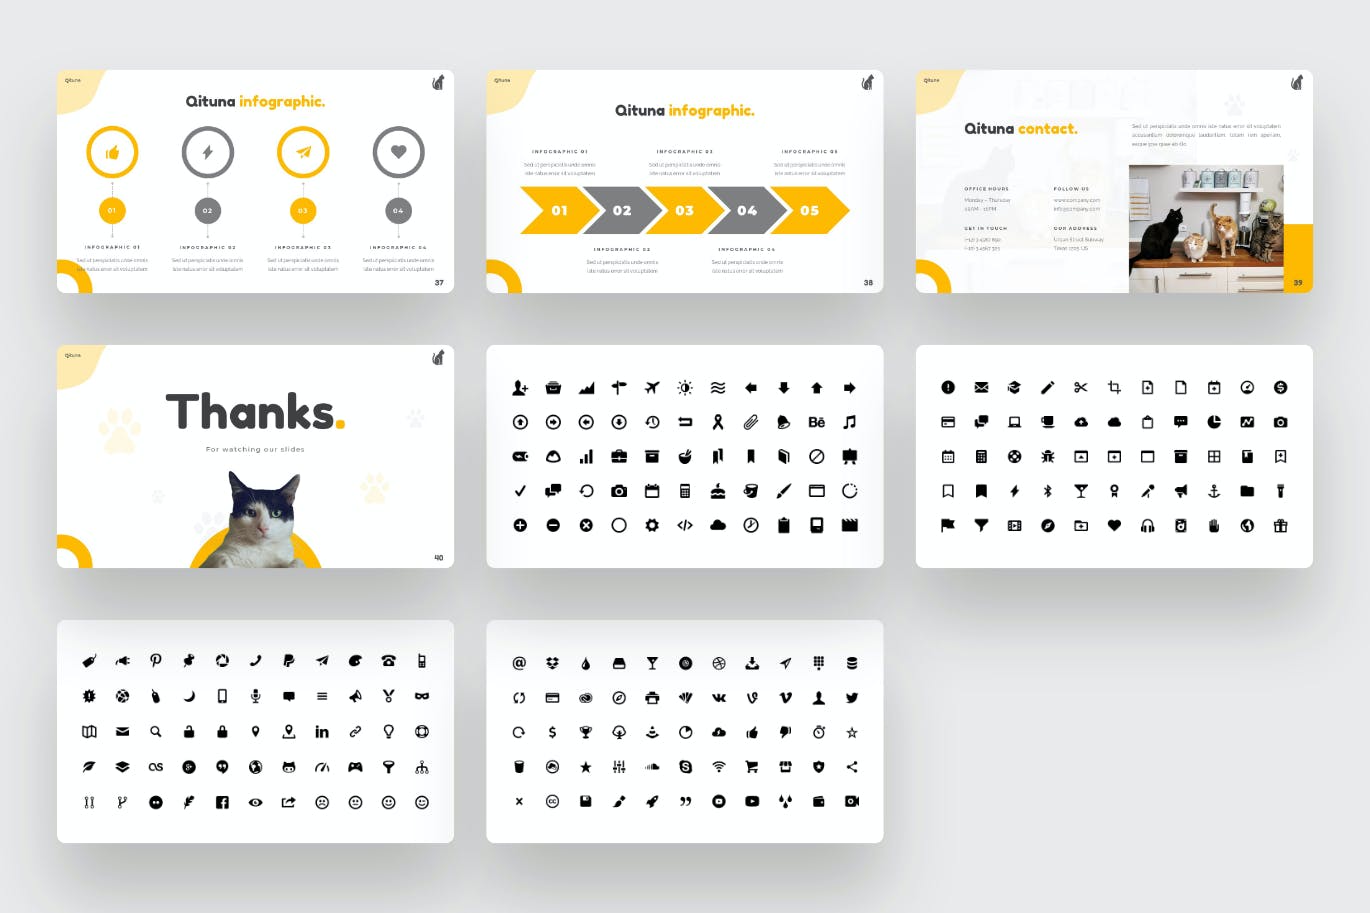 Template includes vivid infographics and icons.